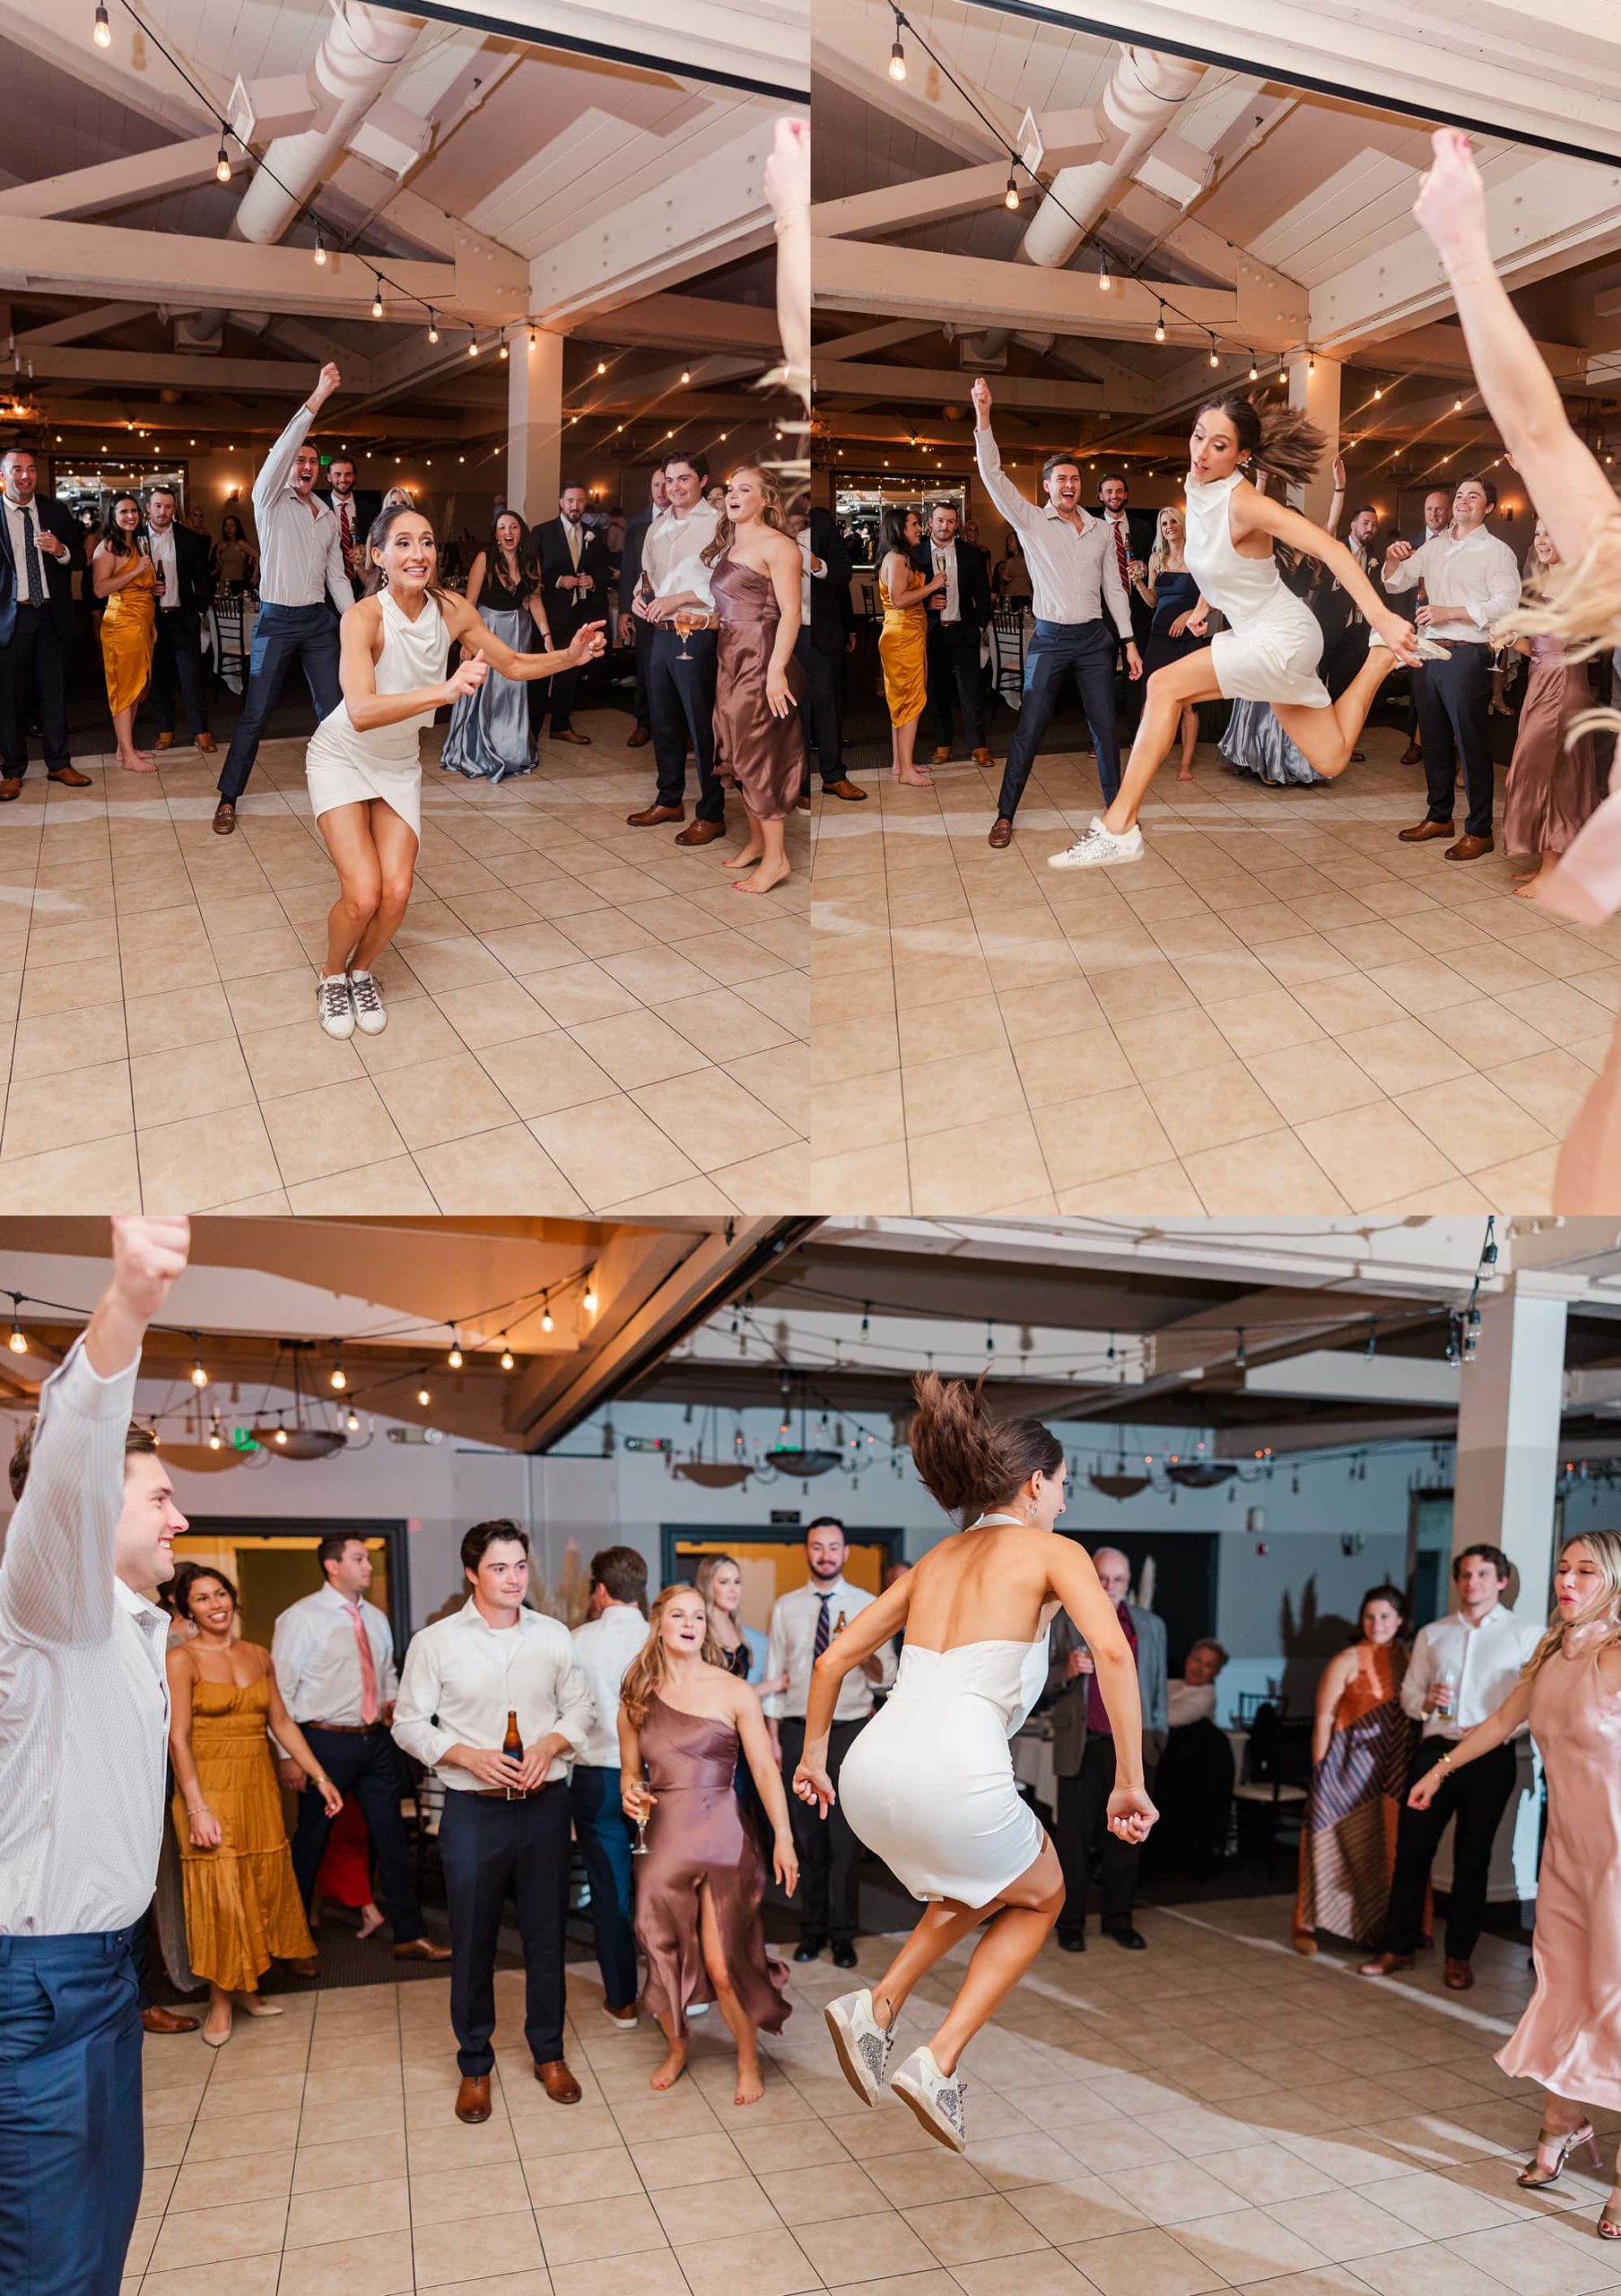 double dutch jumprope with no rope at wedding 